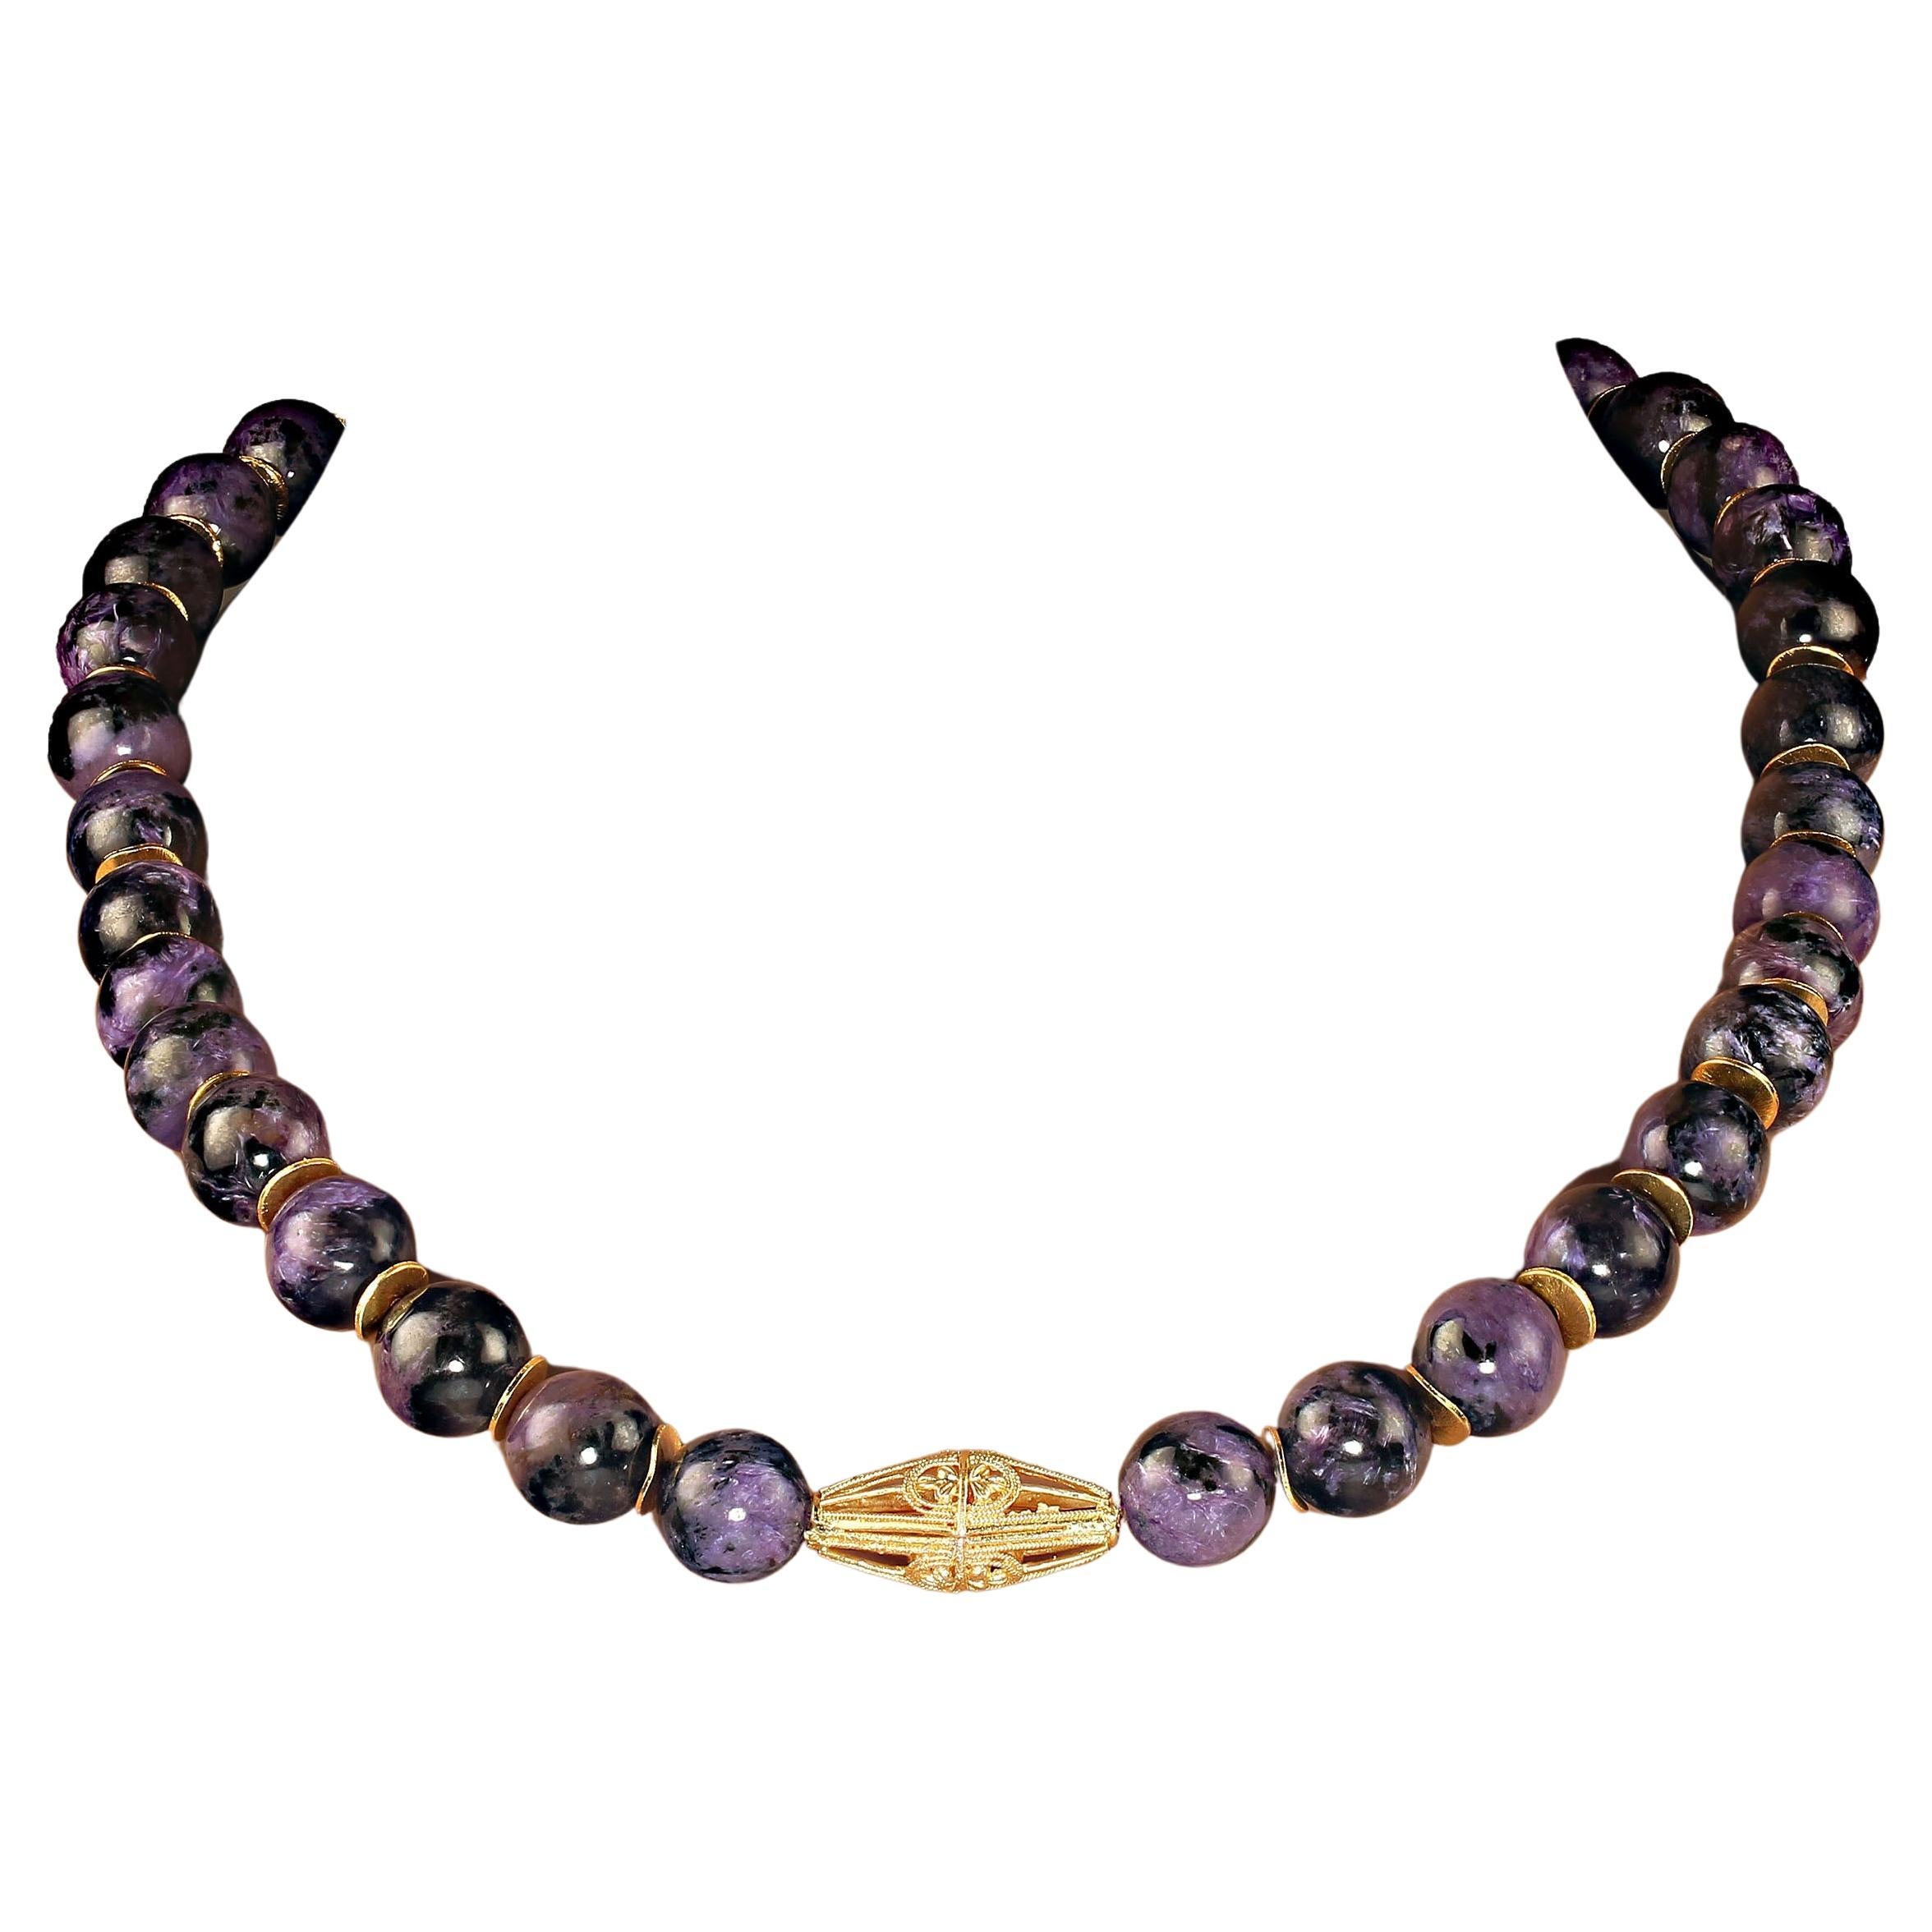 Artisan AJD 22 Inch Glowing Charoite with gold tone accents necklace     Great Gift! For Sale